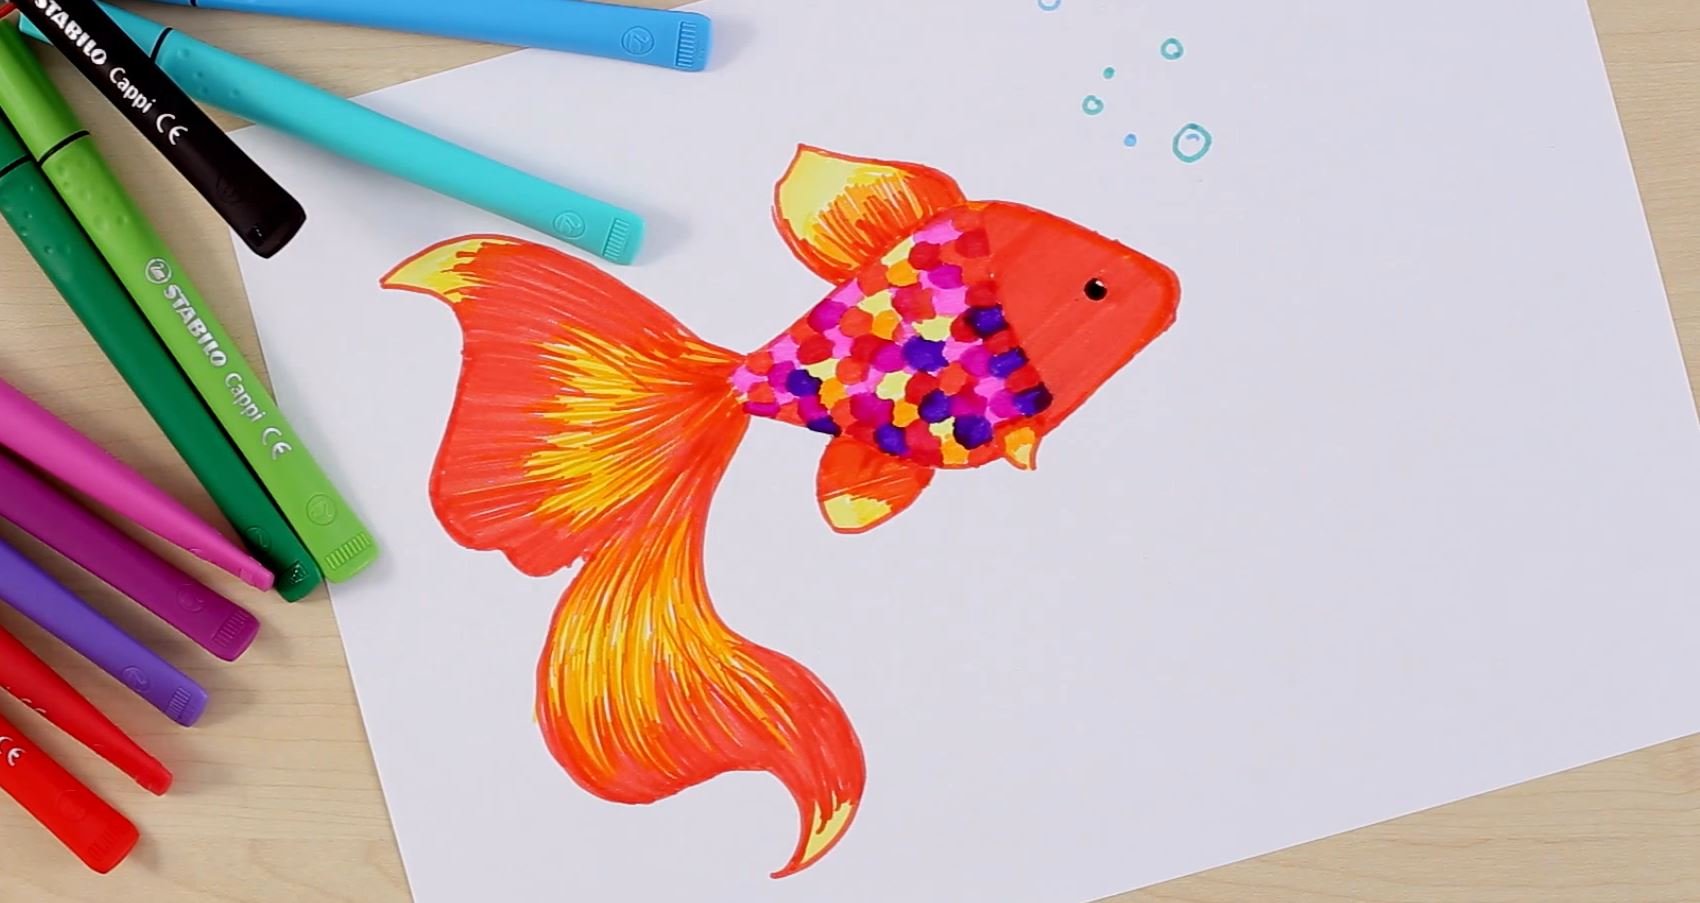 STABILO Painting and drawing for kids - inspiration | STABILO